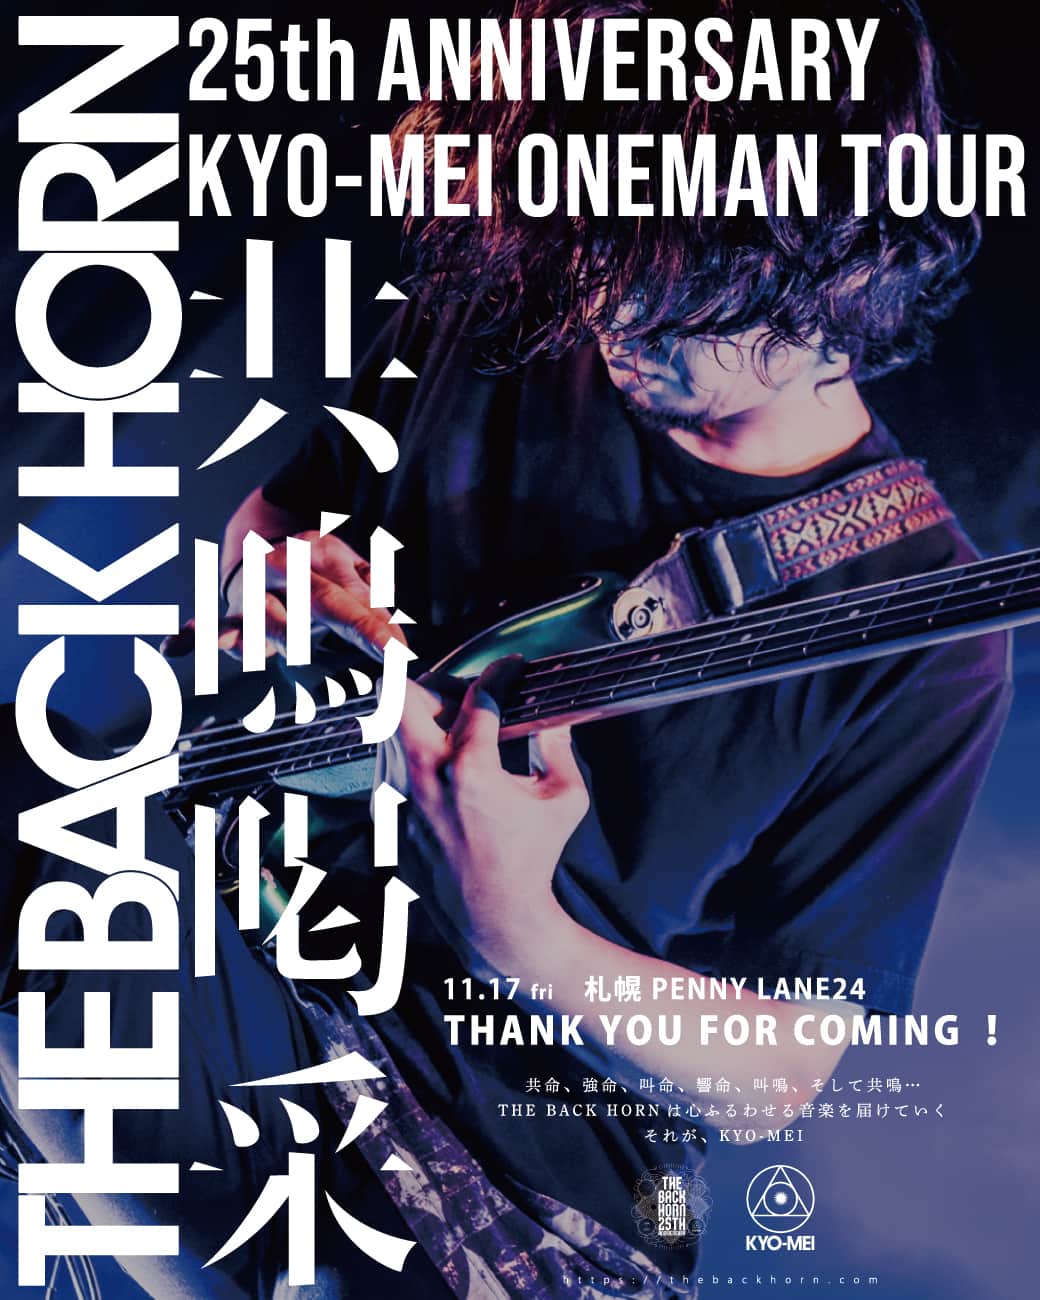 THE BACK HORNのインスタグラム：「THE BACK HORN 25th Anniversary 「KYO-MEIワンマンツアー」〜共鳴喝采〜  🗓2023.11.17 fri 📍札幌PENNY LANE24  THANK YOU FOR COMING‼️  NEXT... 11/19 盛岡Club Change WAVE  ▼Ticket https://lnkfi.re/kyomei_kassai  #共鳴喝采 #TBH25th #THEBACKHORN #バックホーン #バクホン」